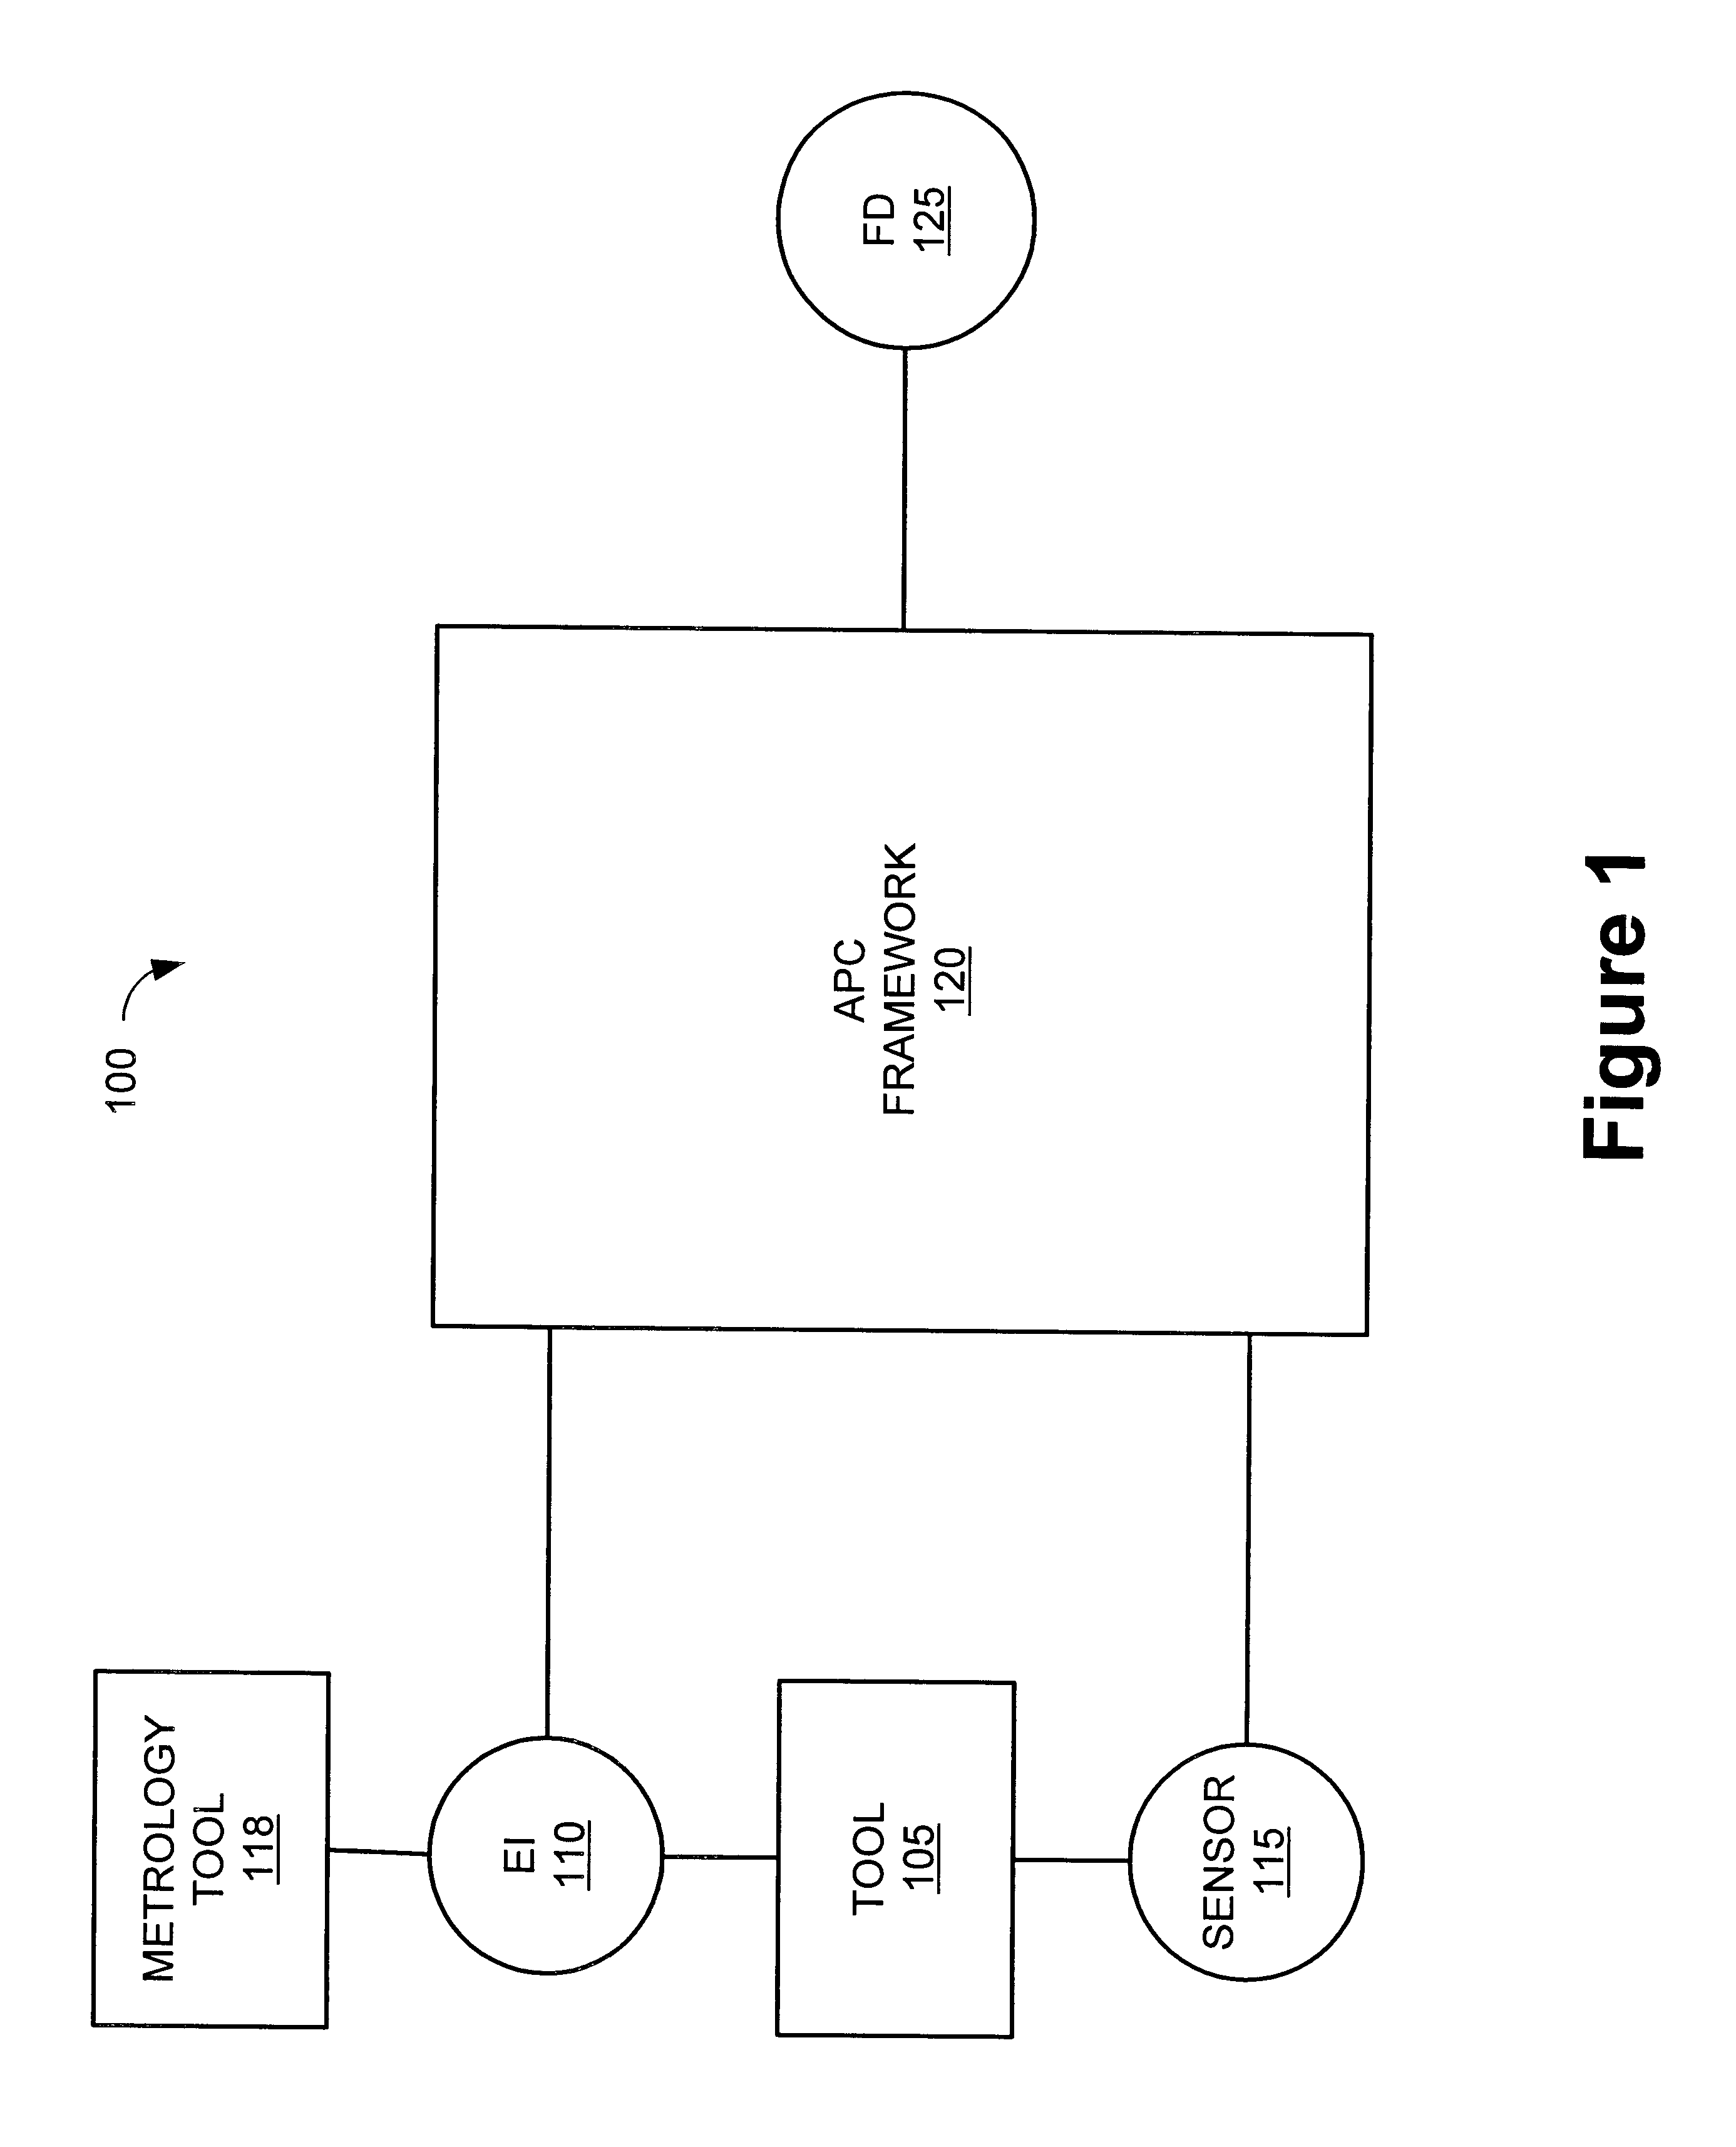 Method and apparatus for integration of real-time tool data and in-line metrology for fault detection in an advanced process control (APC) framework